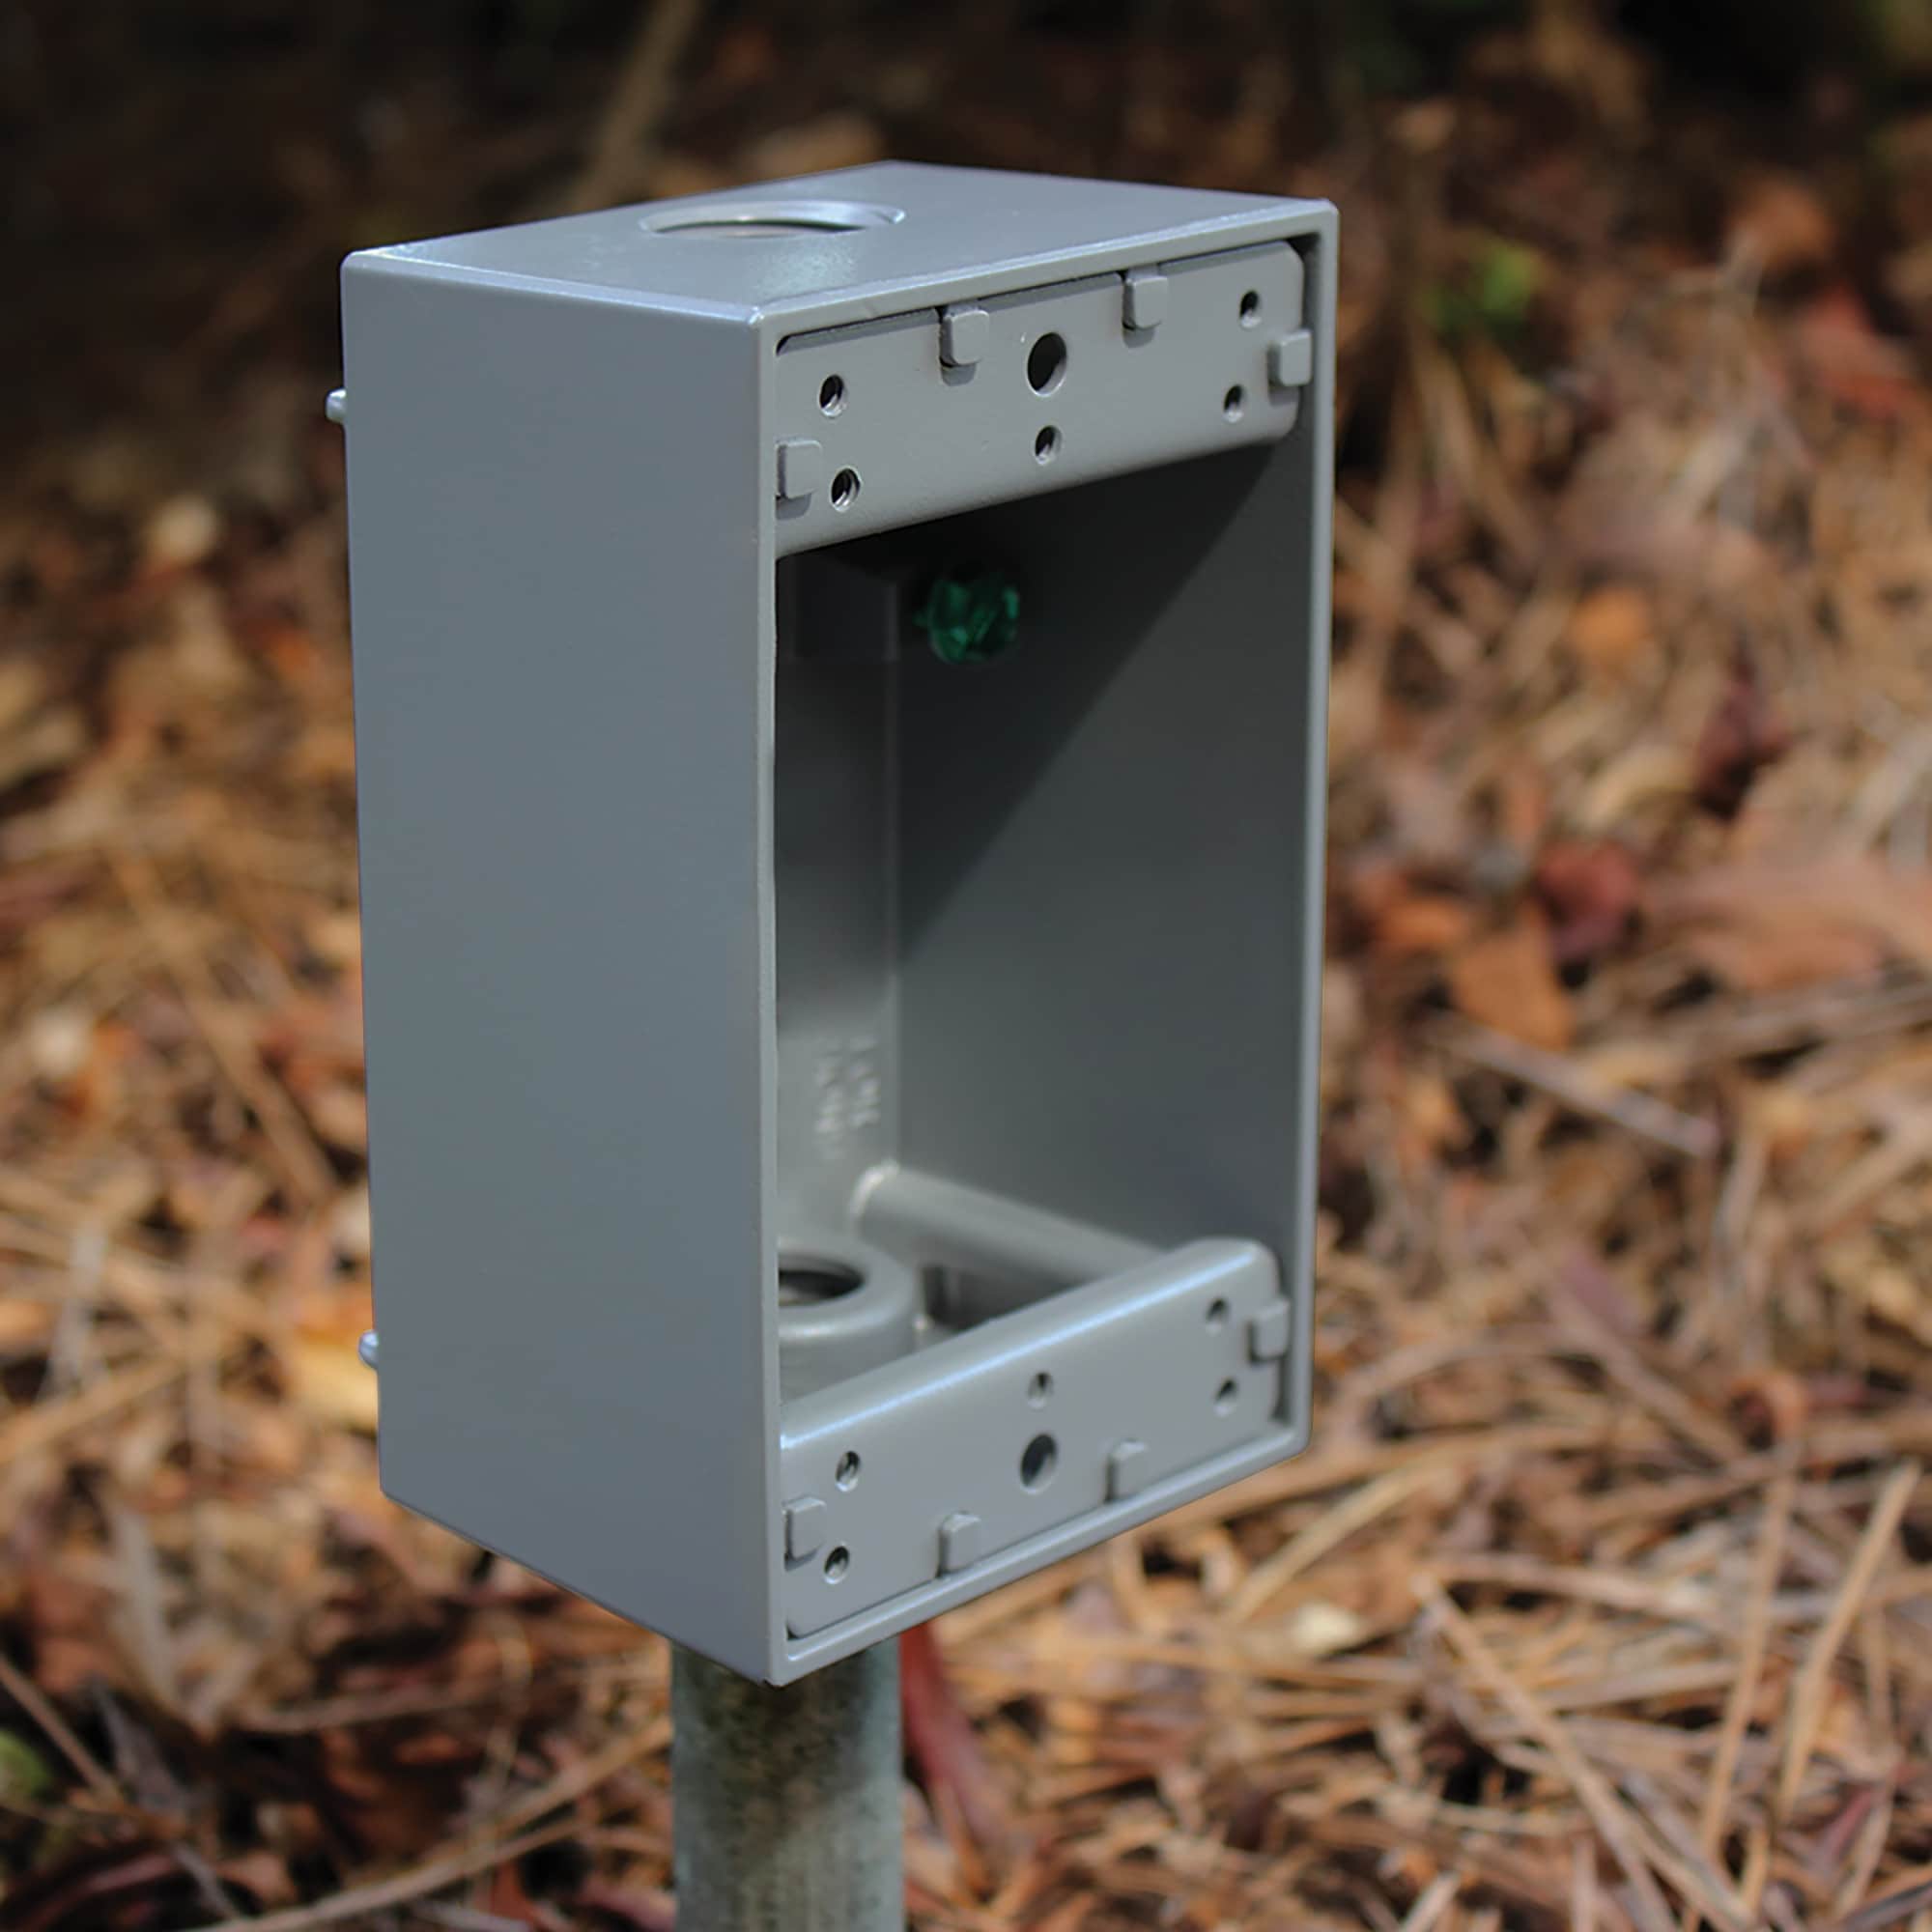 Sigma Engineered Solutions 1-Gang Metal Weatherproof New Work Rectangular  Electrical Box in the Electrical Boxes department at